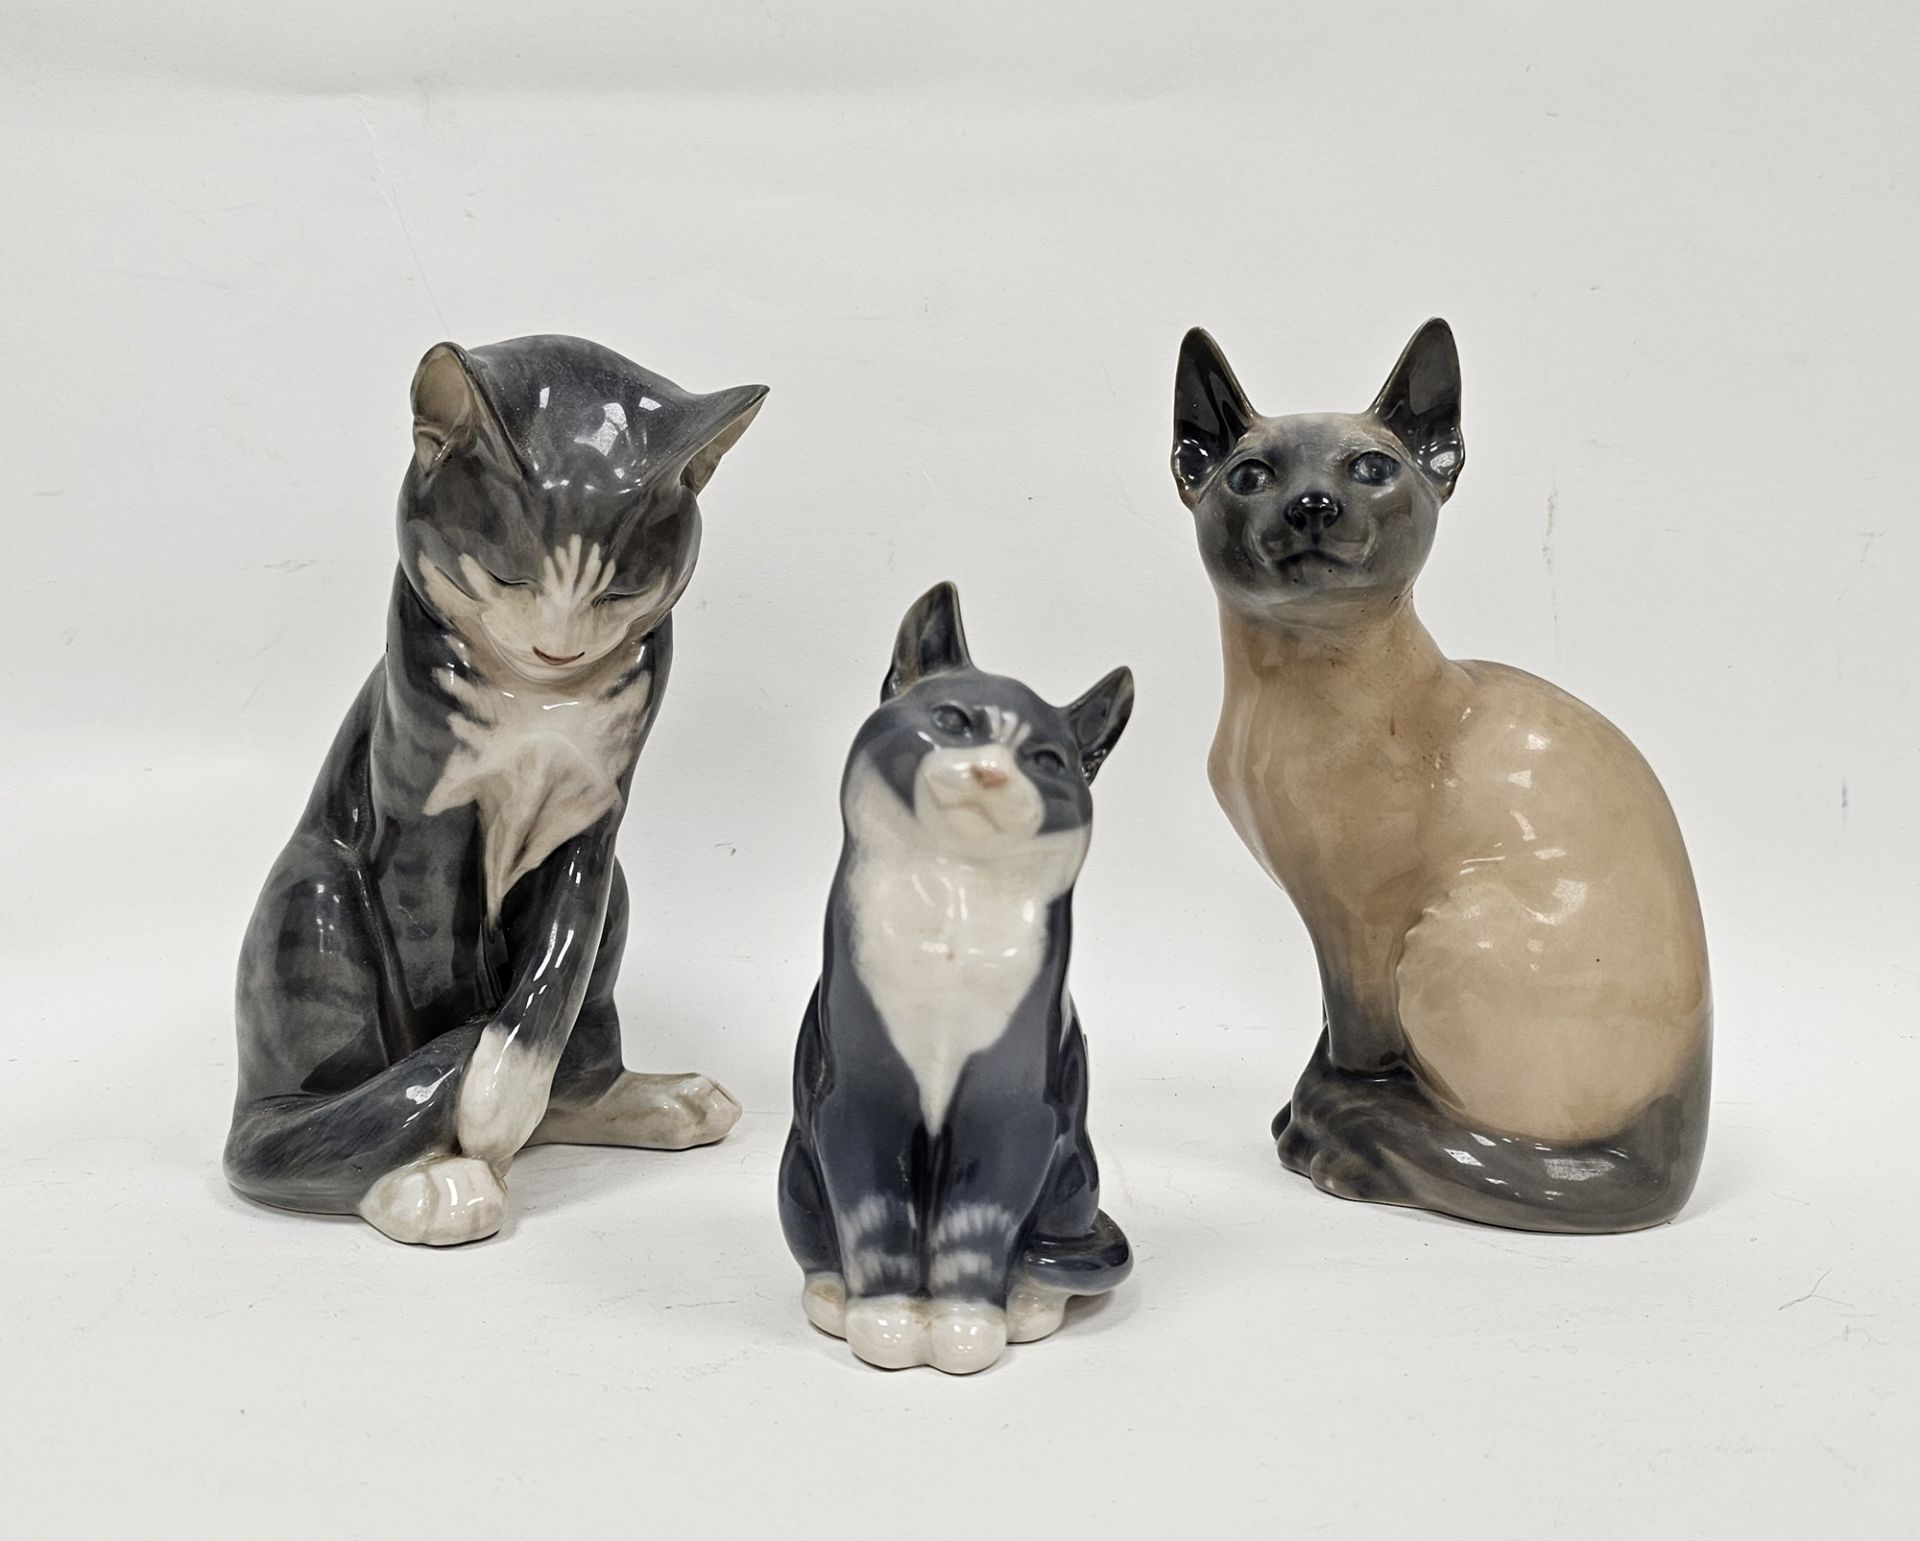 Three Royal Copenhagen porcelain models of cats, each modelled seated, one modelled as a Siamese,